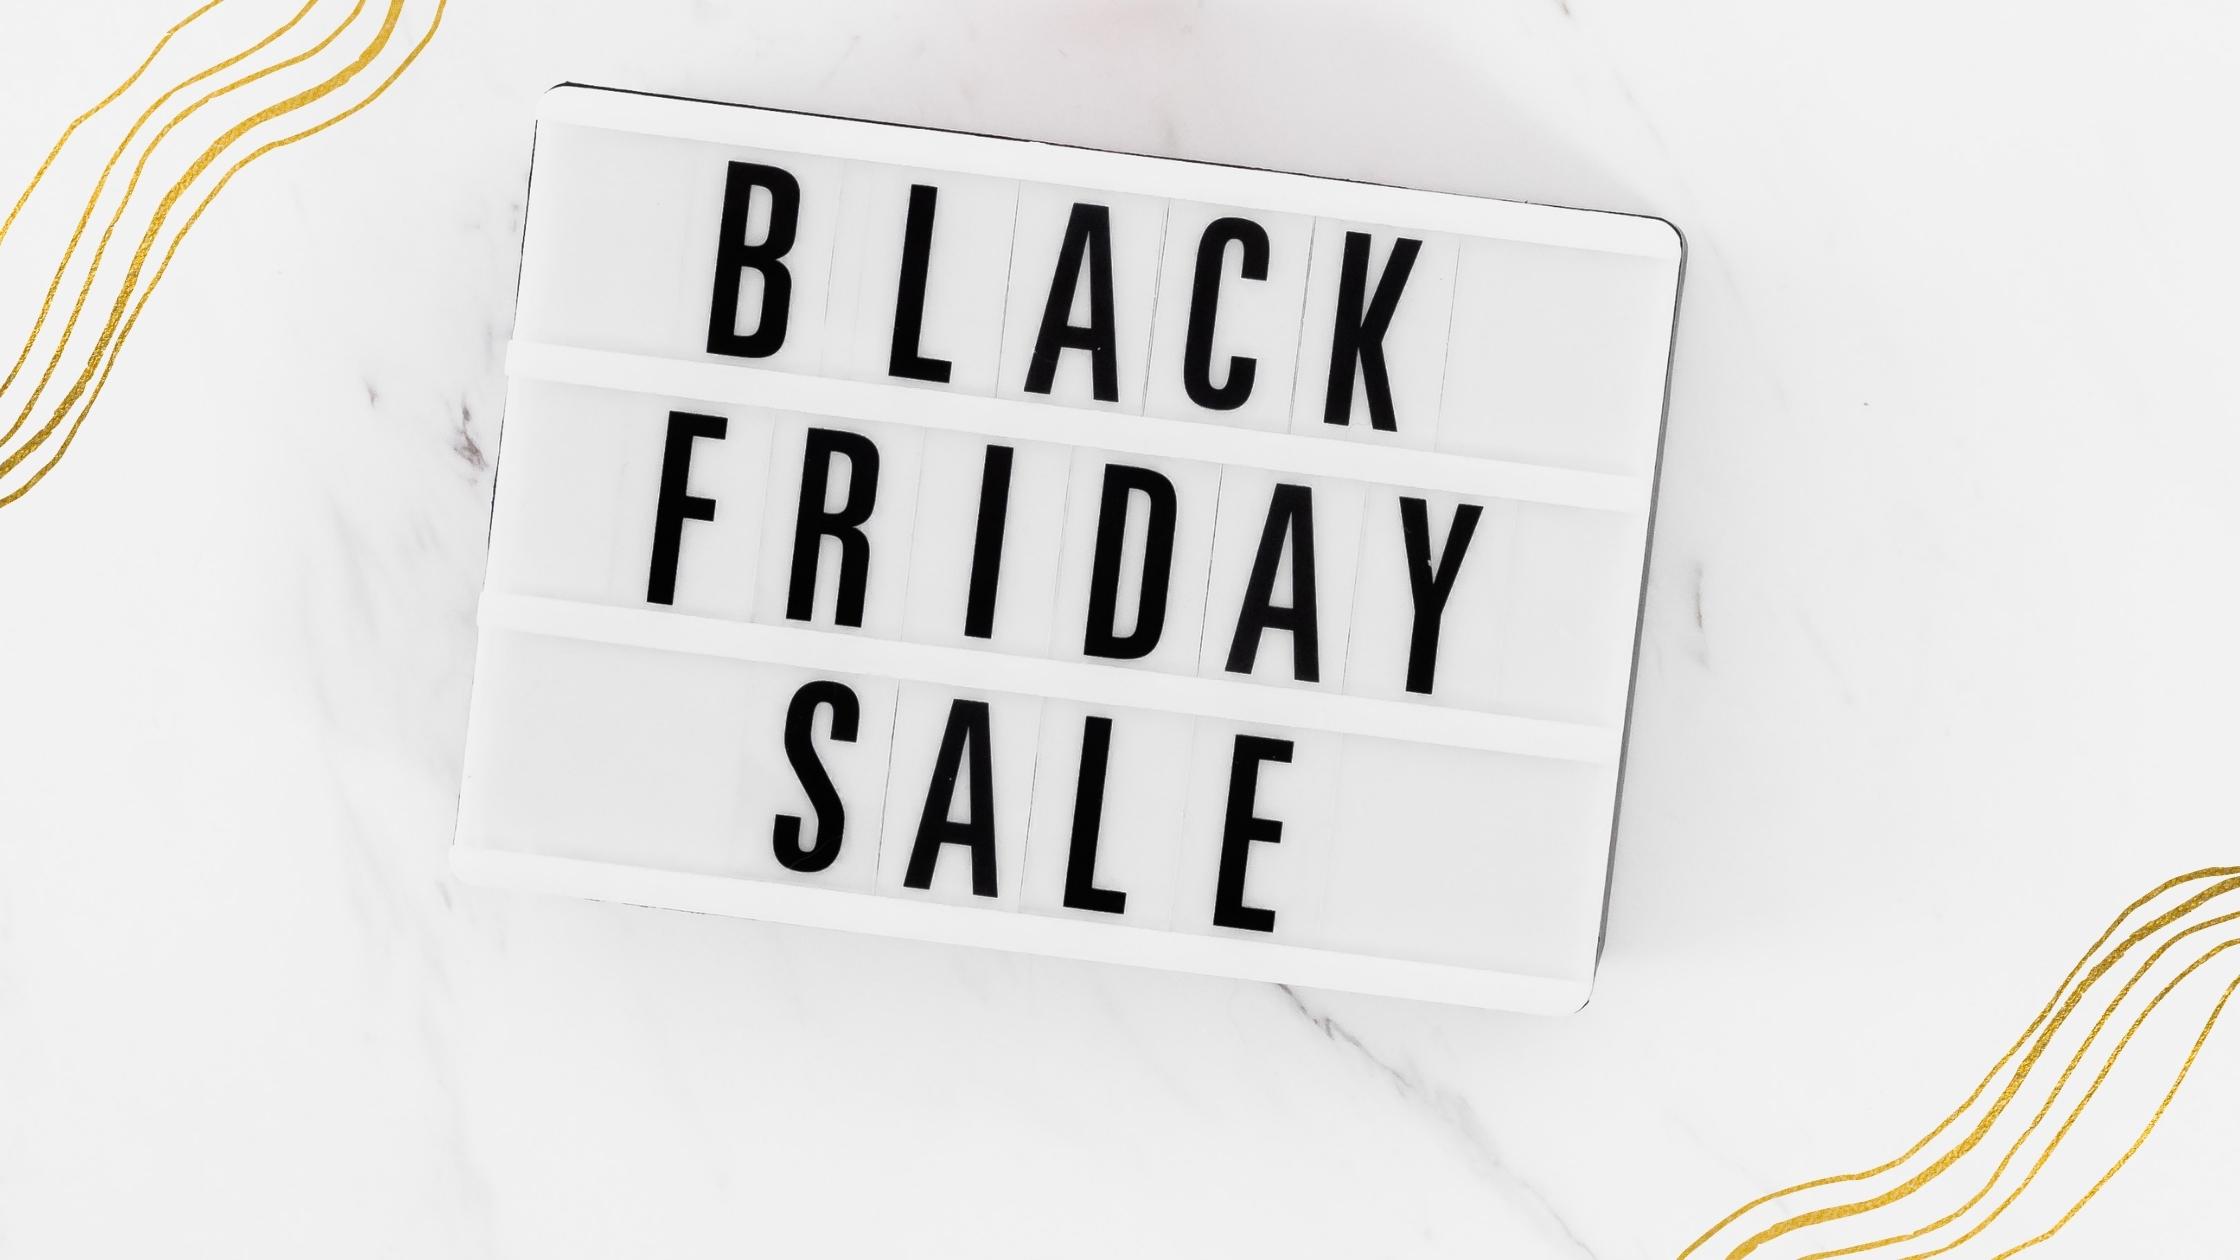 Black Friday deals for bloggers sign 